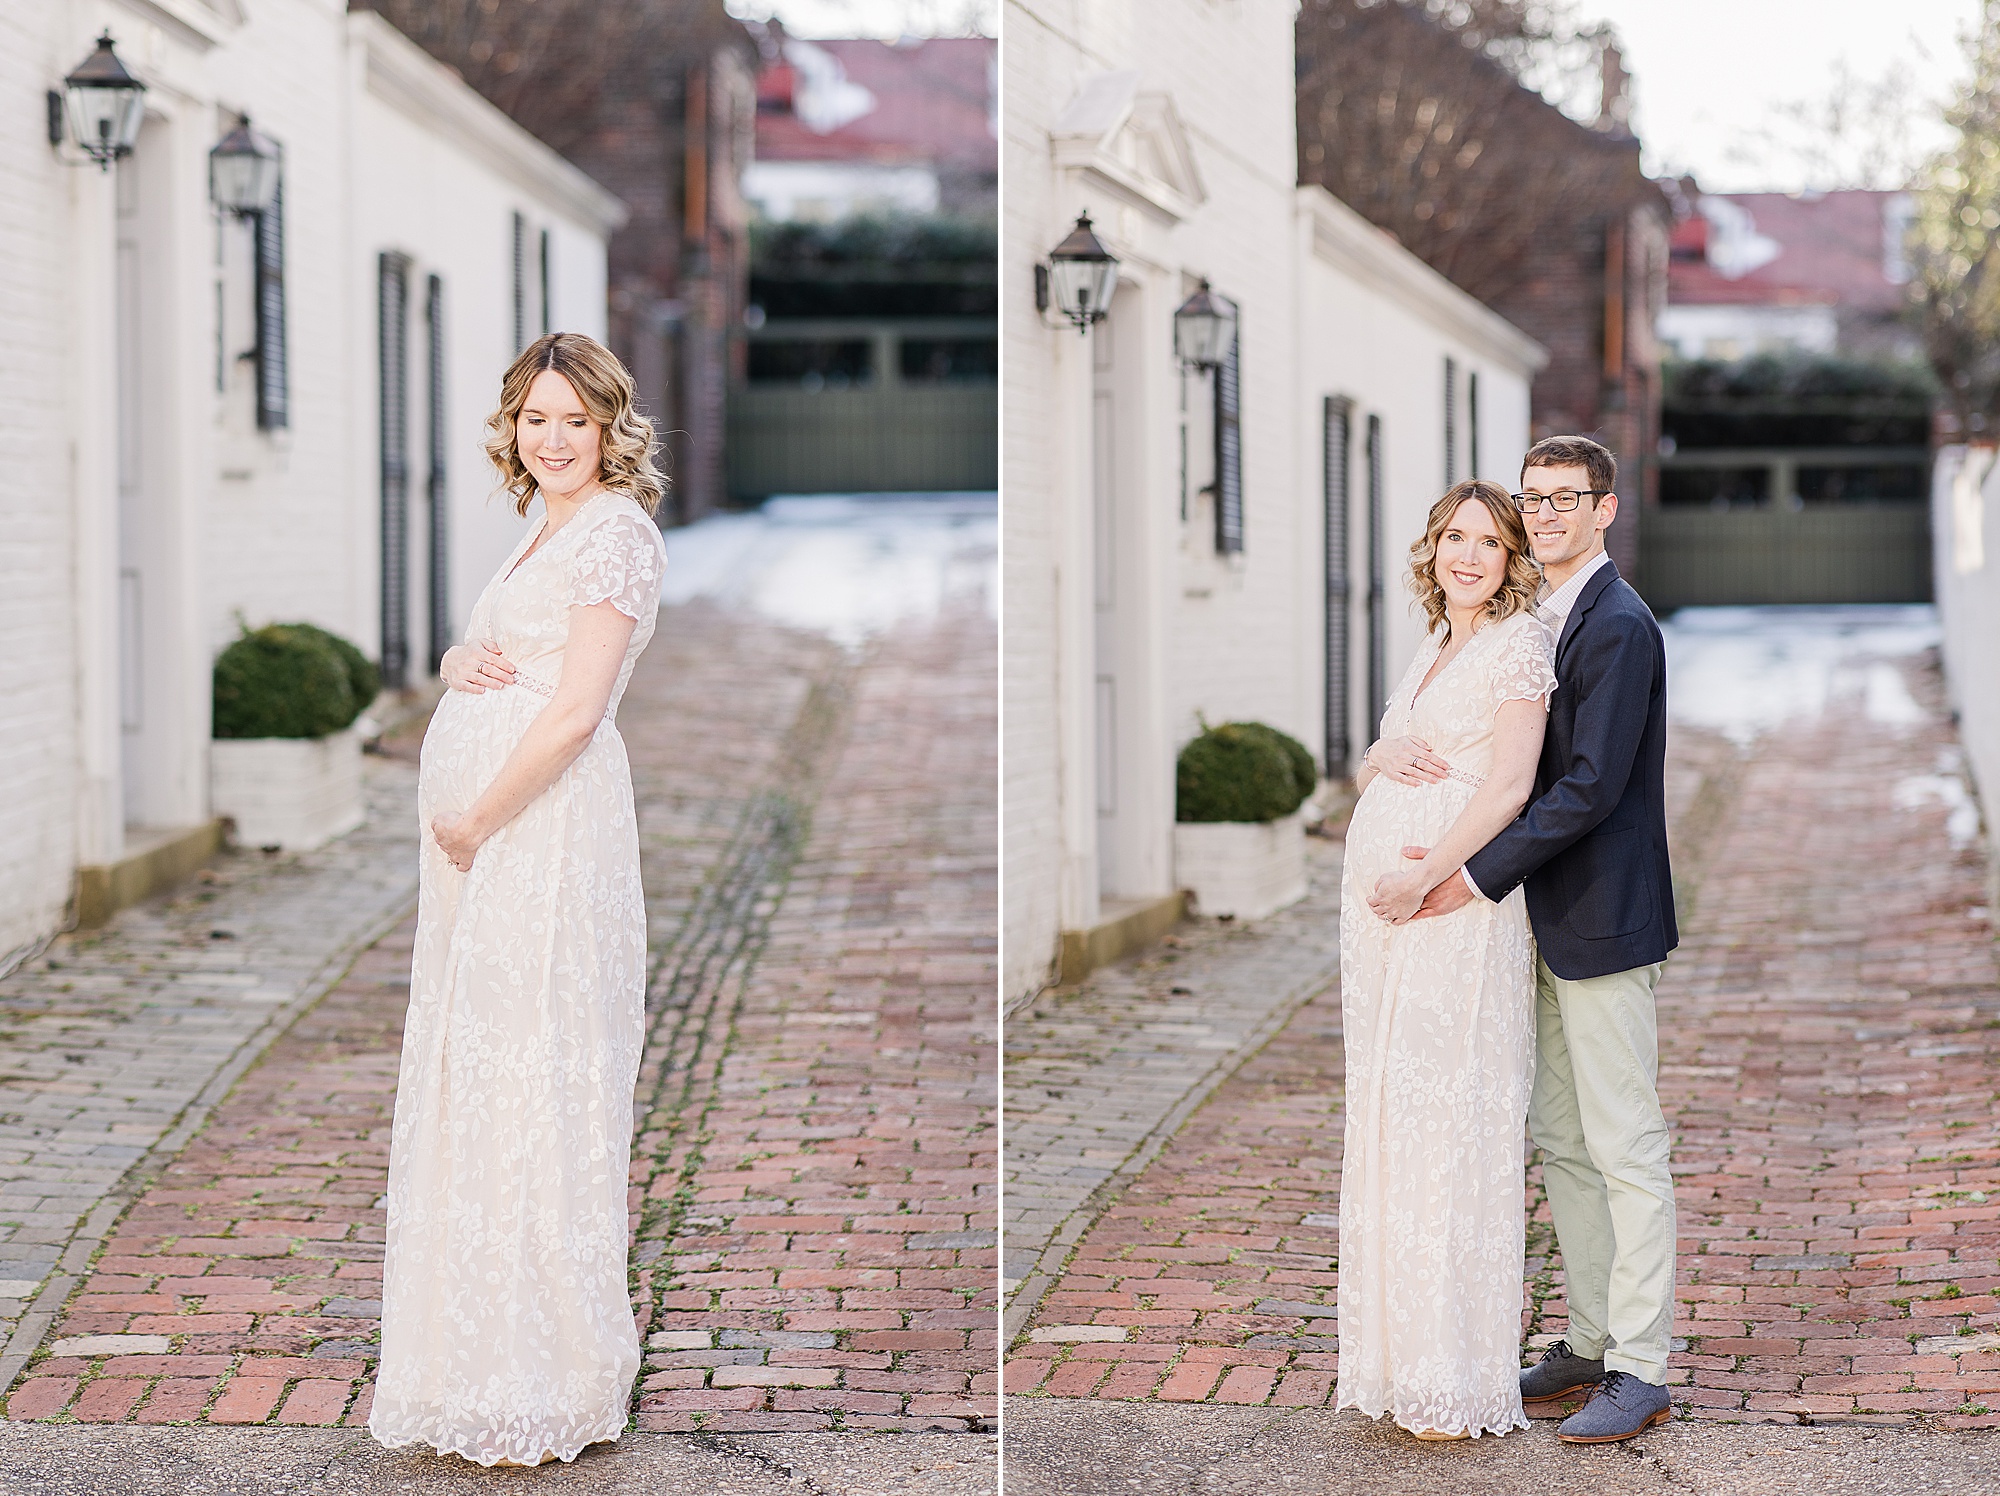 expecting parents pose in alley way during winter Historic Alexandria VA maternity session